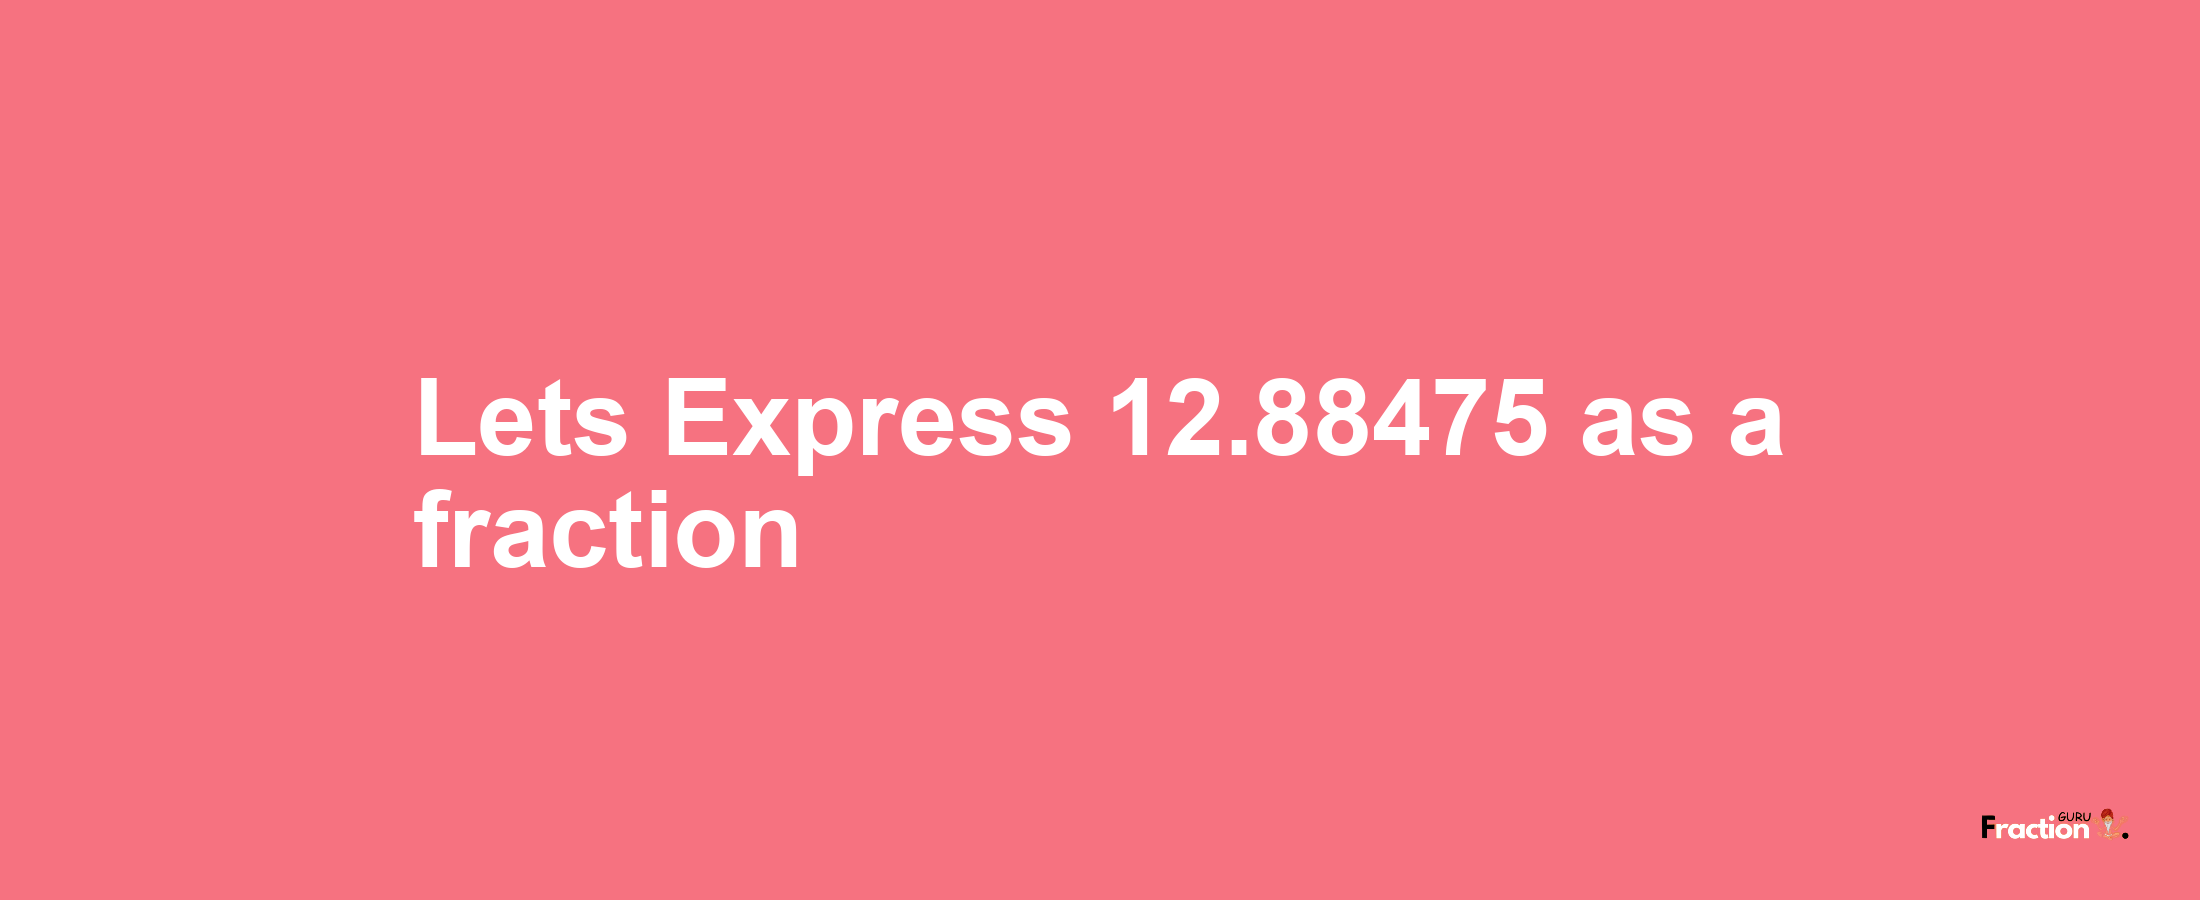 Lets Express 12.88475 as afraction